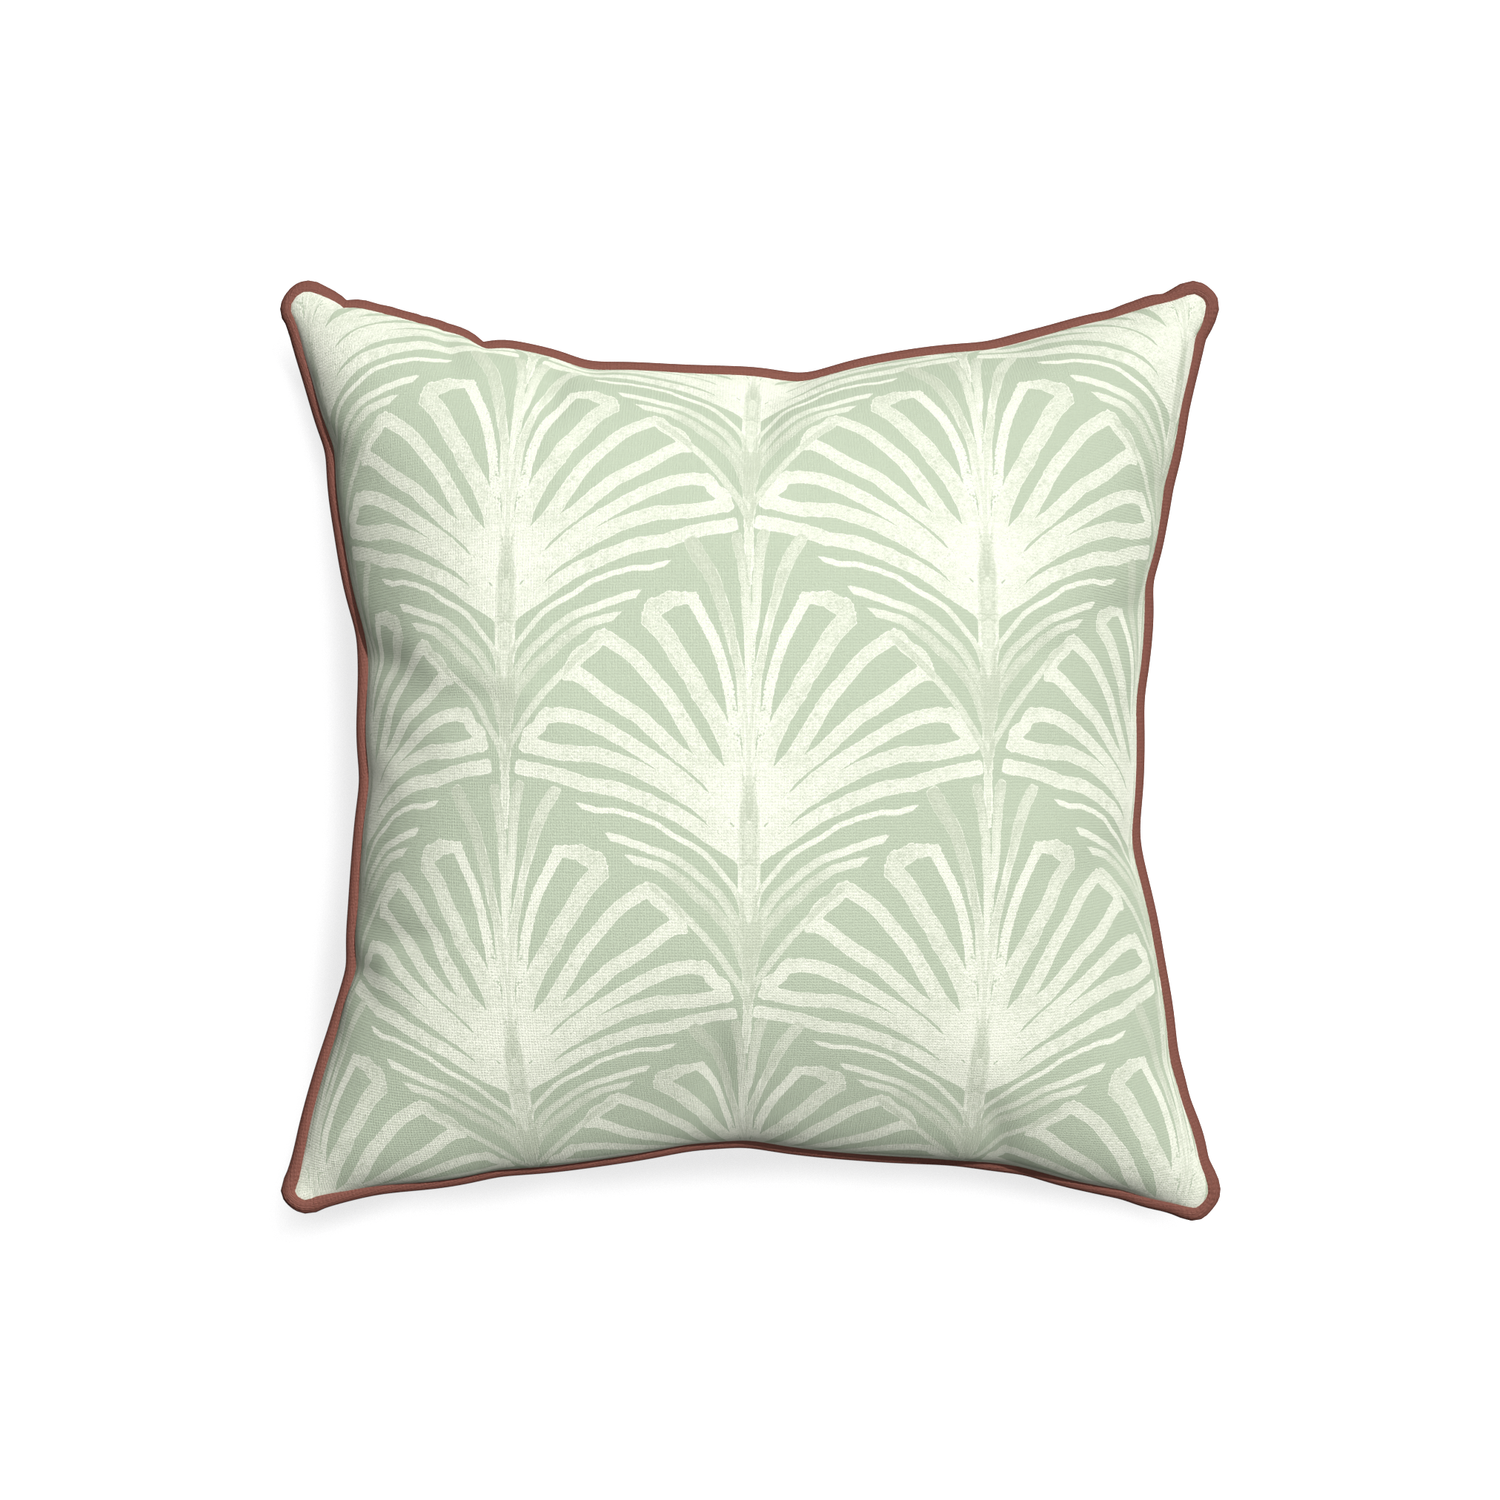 20-square suzy sage custom pillow with w piping on white background